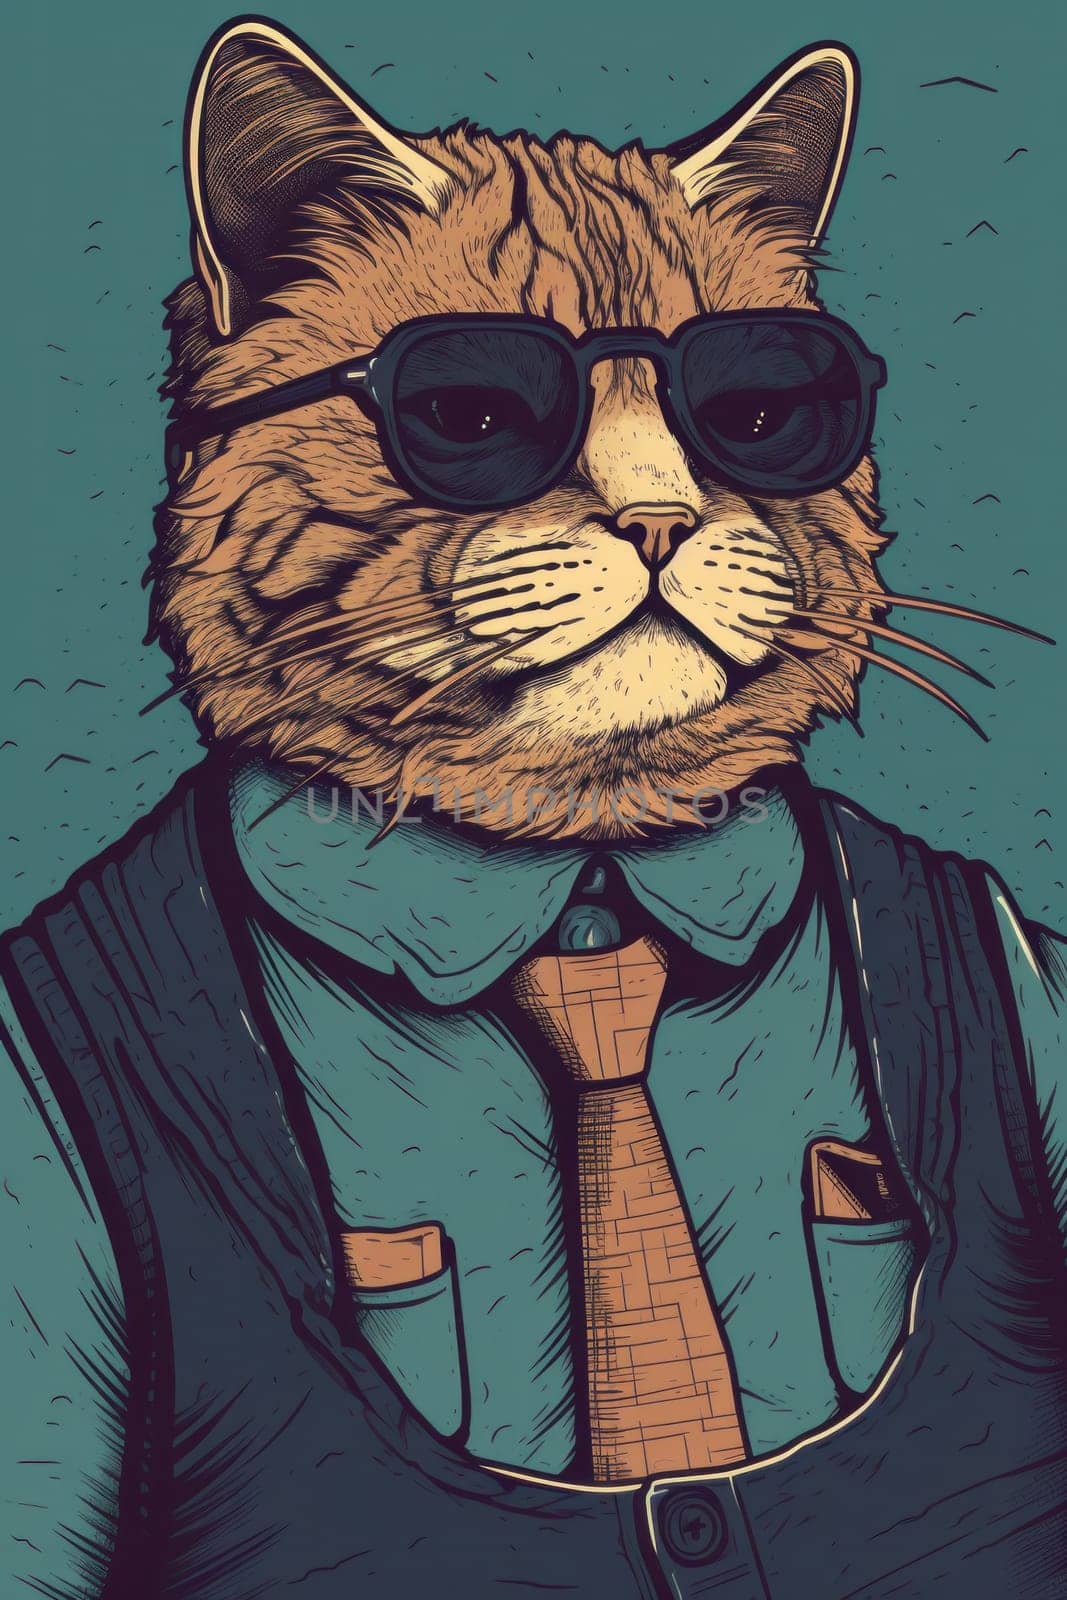 A drawing of a cat wearing sunglasses and a tie, AI by starush